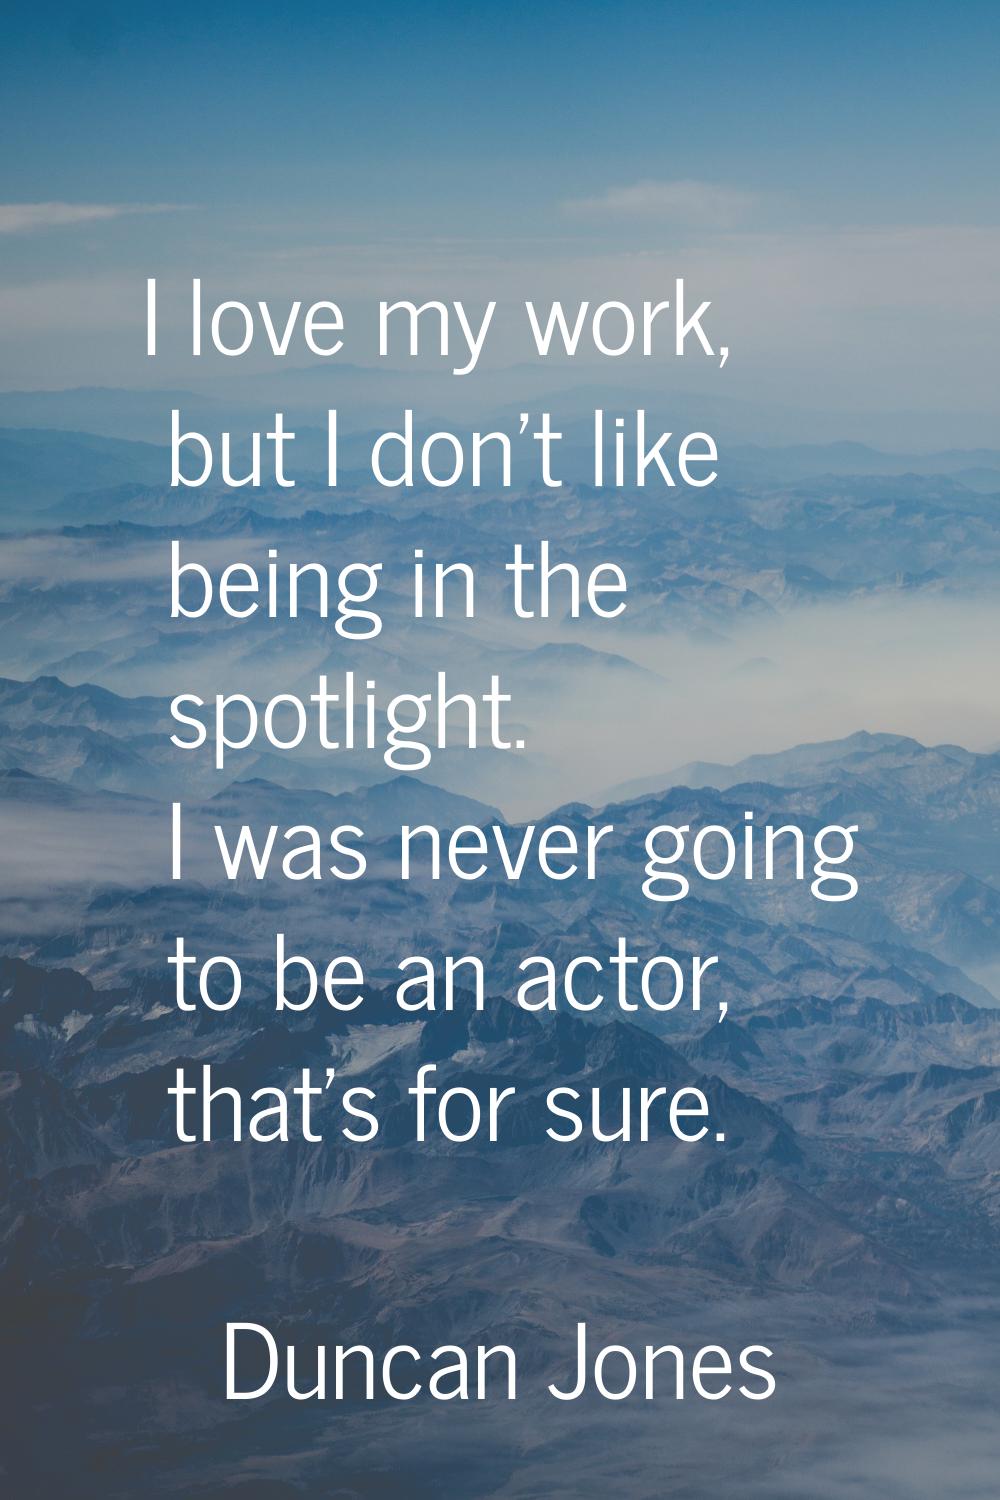 I love my work, but I don't like being in the spotlight. I was never going to be an actor, that's f